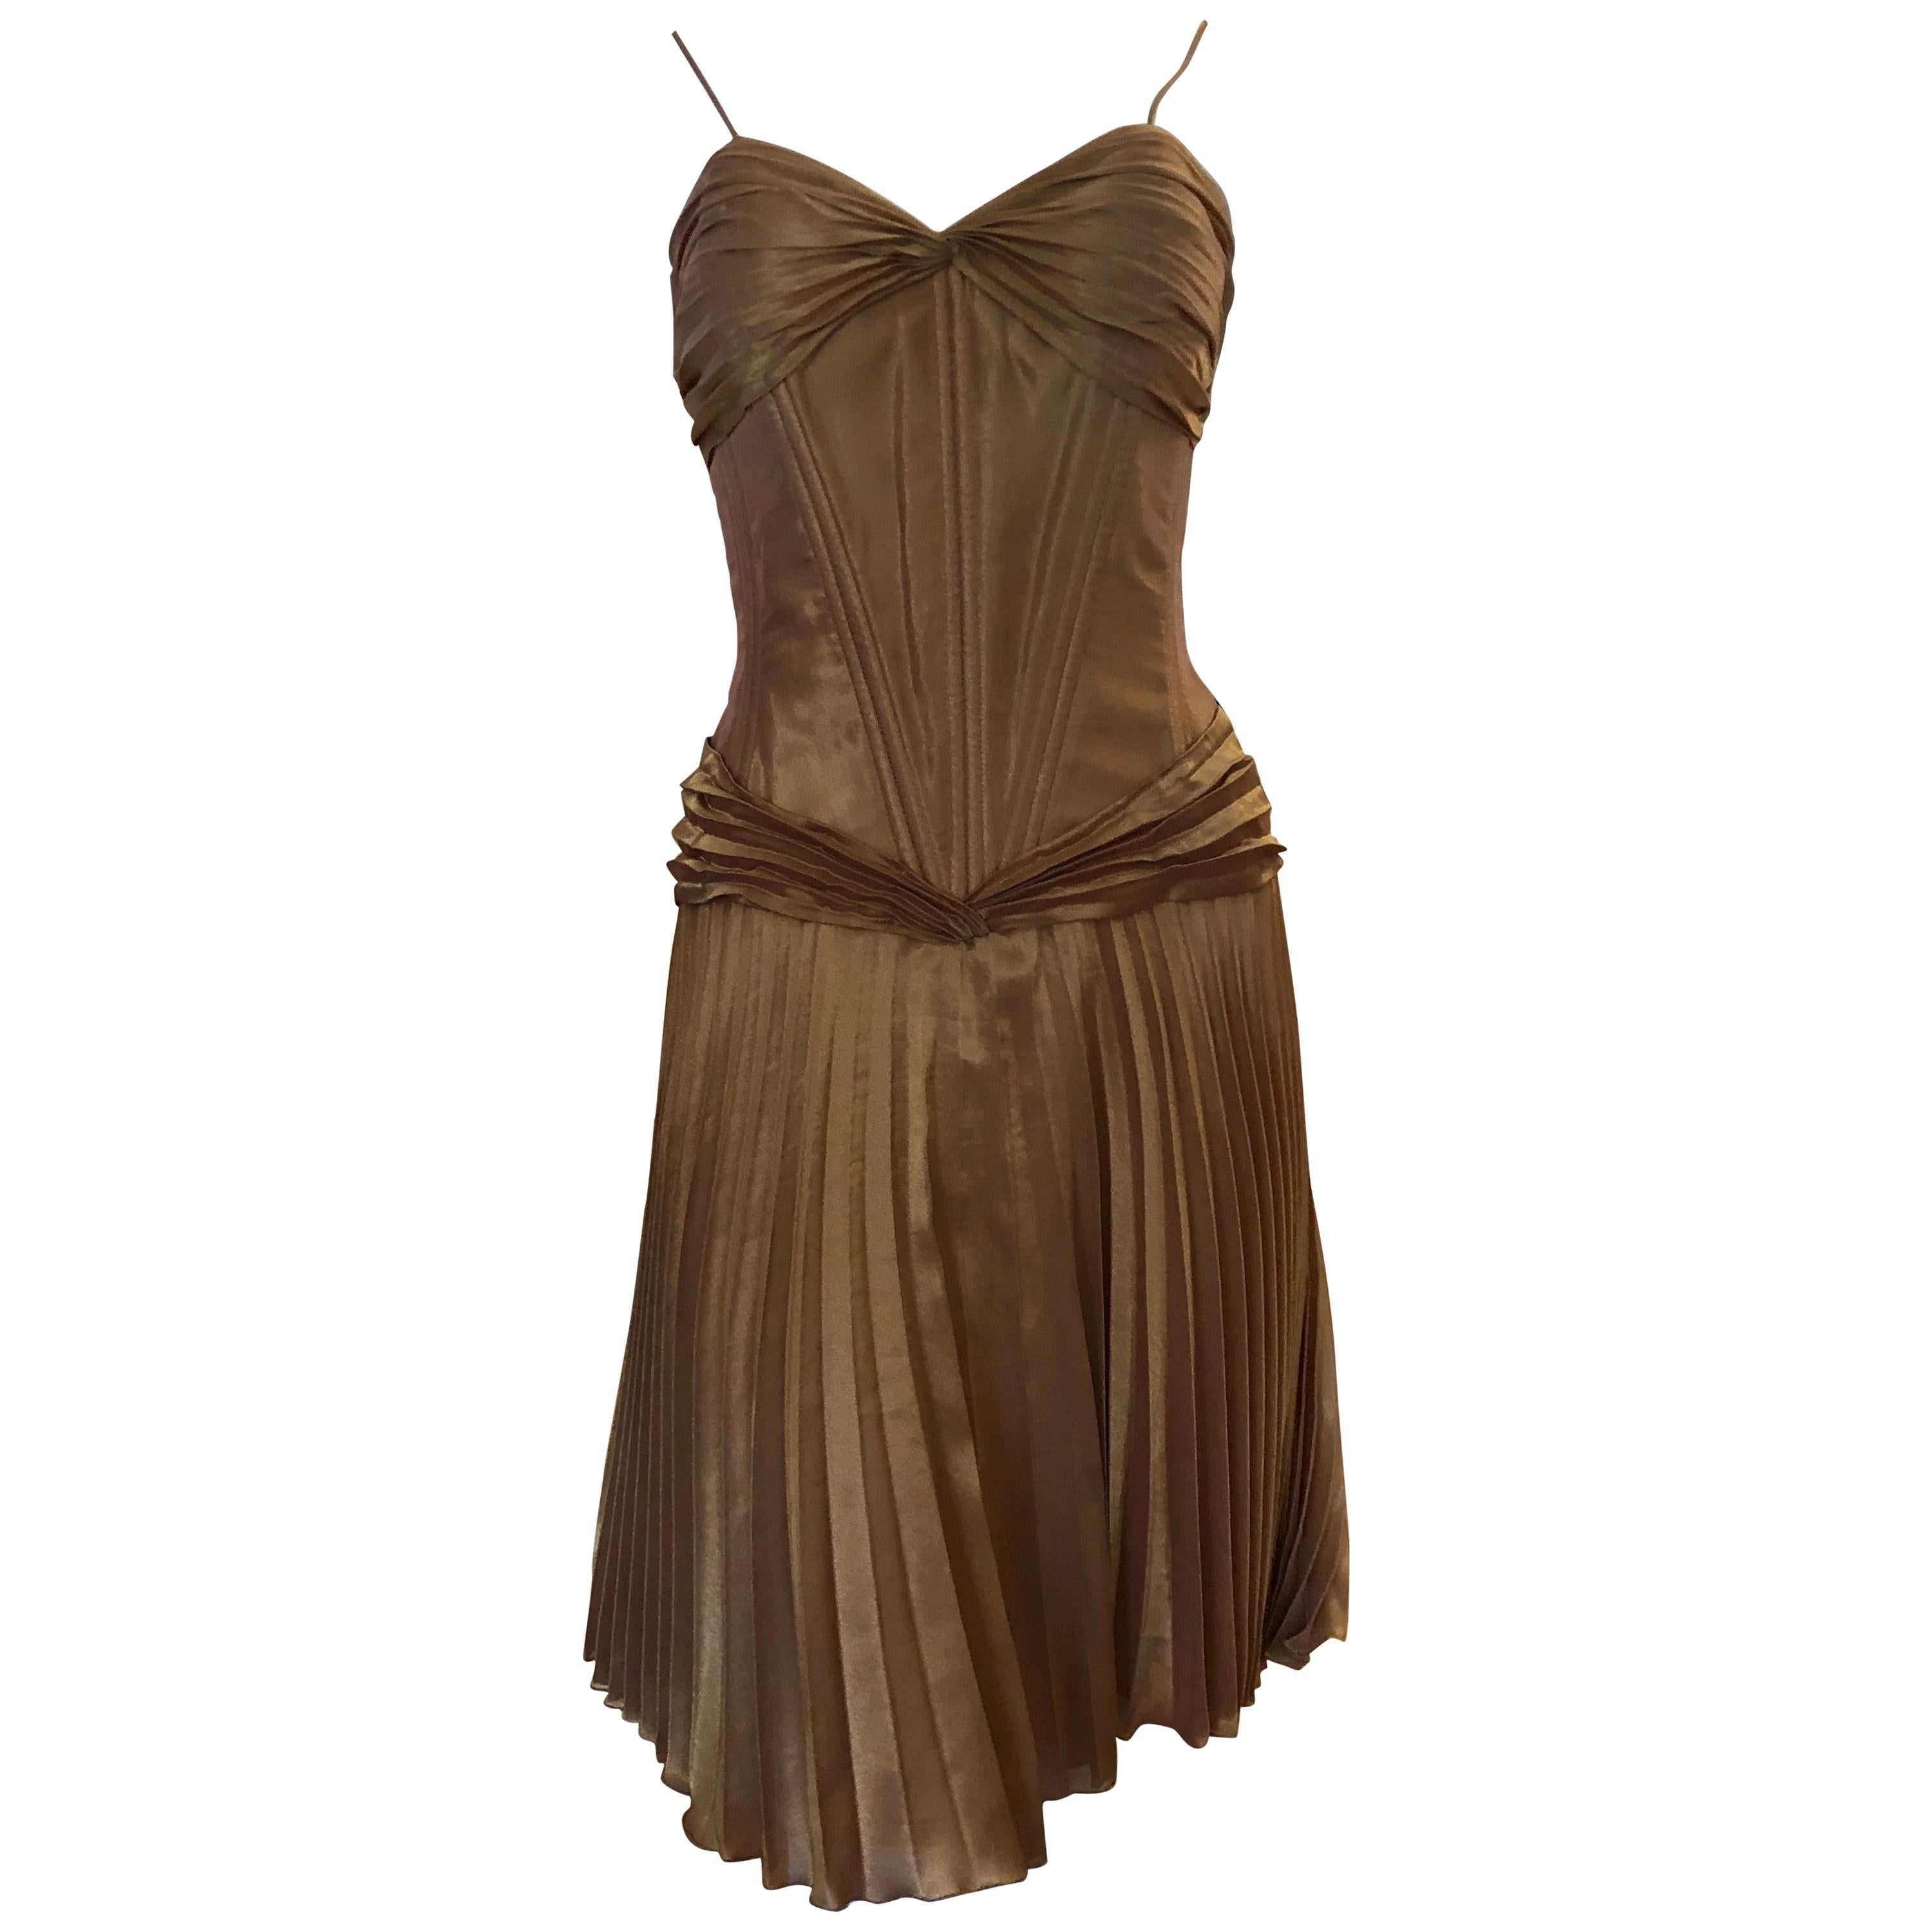 1980s Vicky Tiel "Sara" Couture Metallic Gold Lame Dress with Bolero (38) As New For Sale